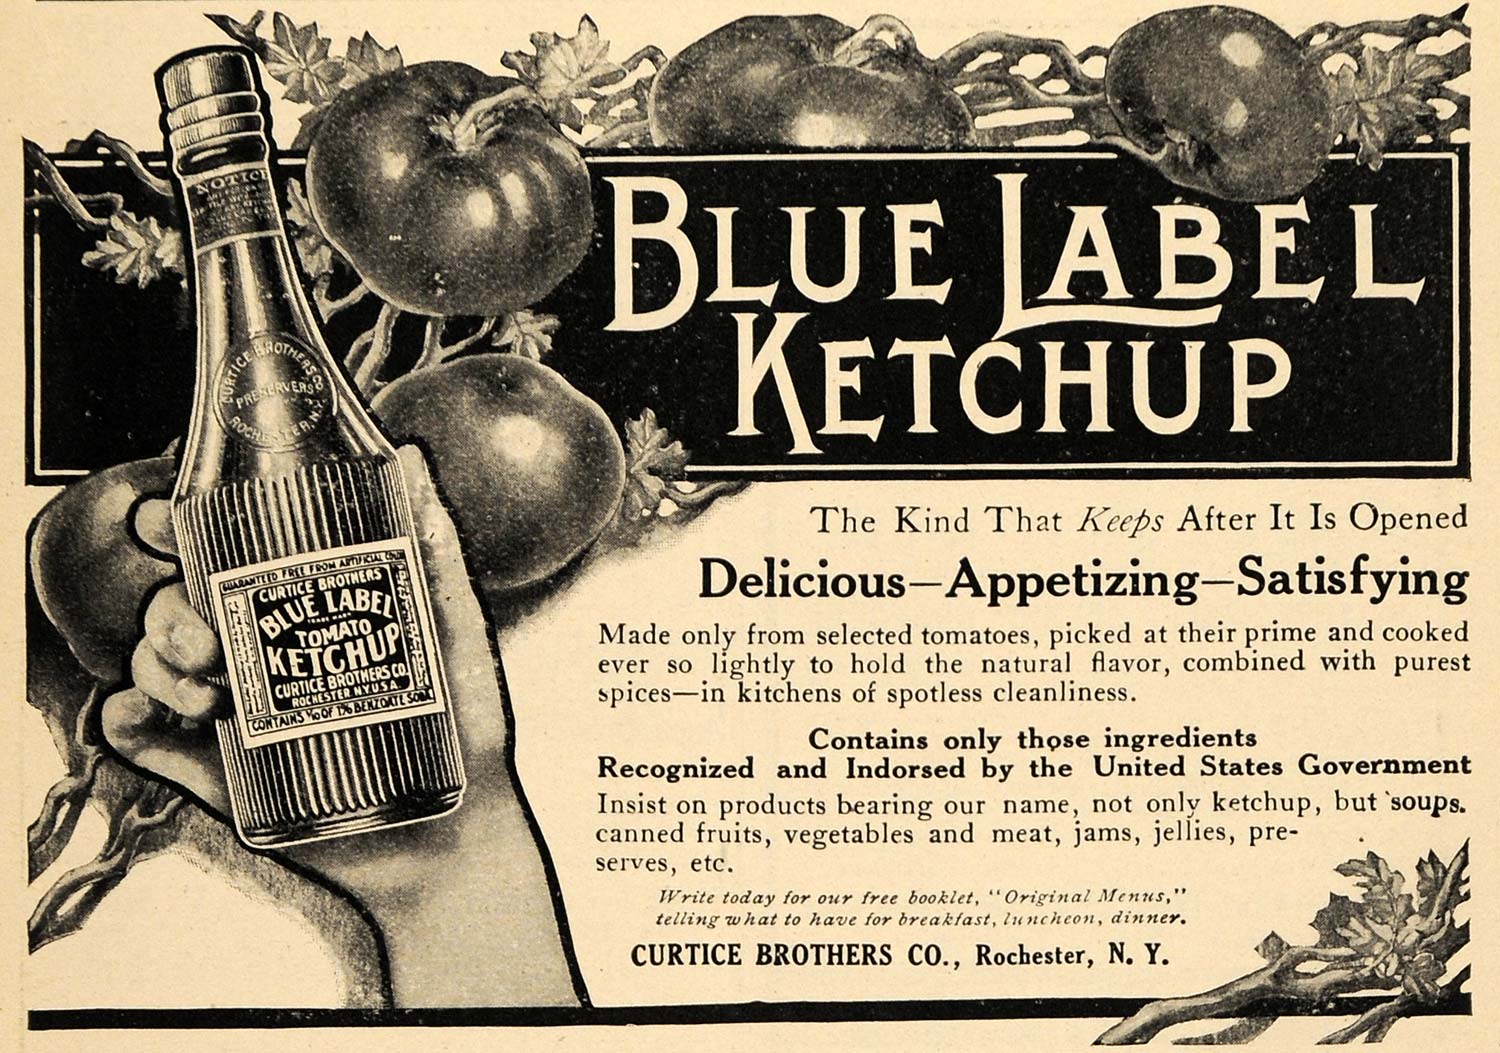 1910 Ad Curtice Brothers Co. Blje Label Tomato Ketchup - ORIGINAL TOM3